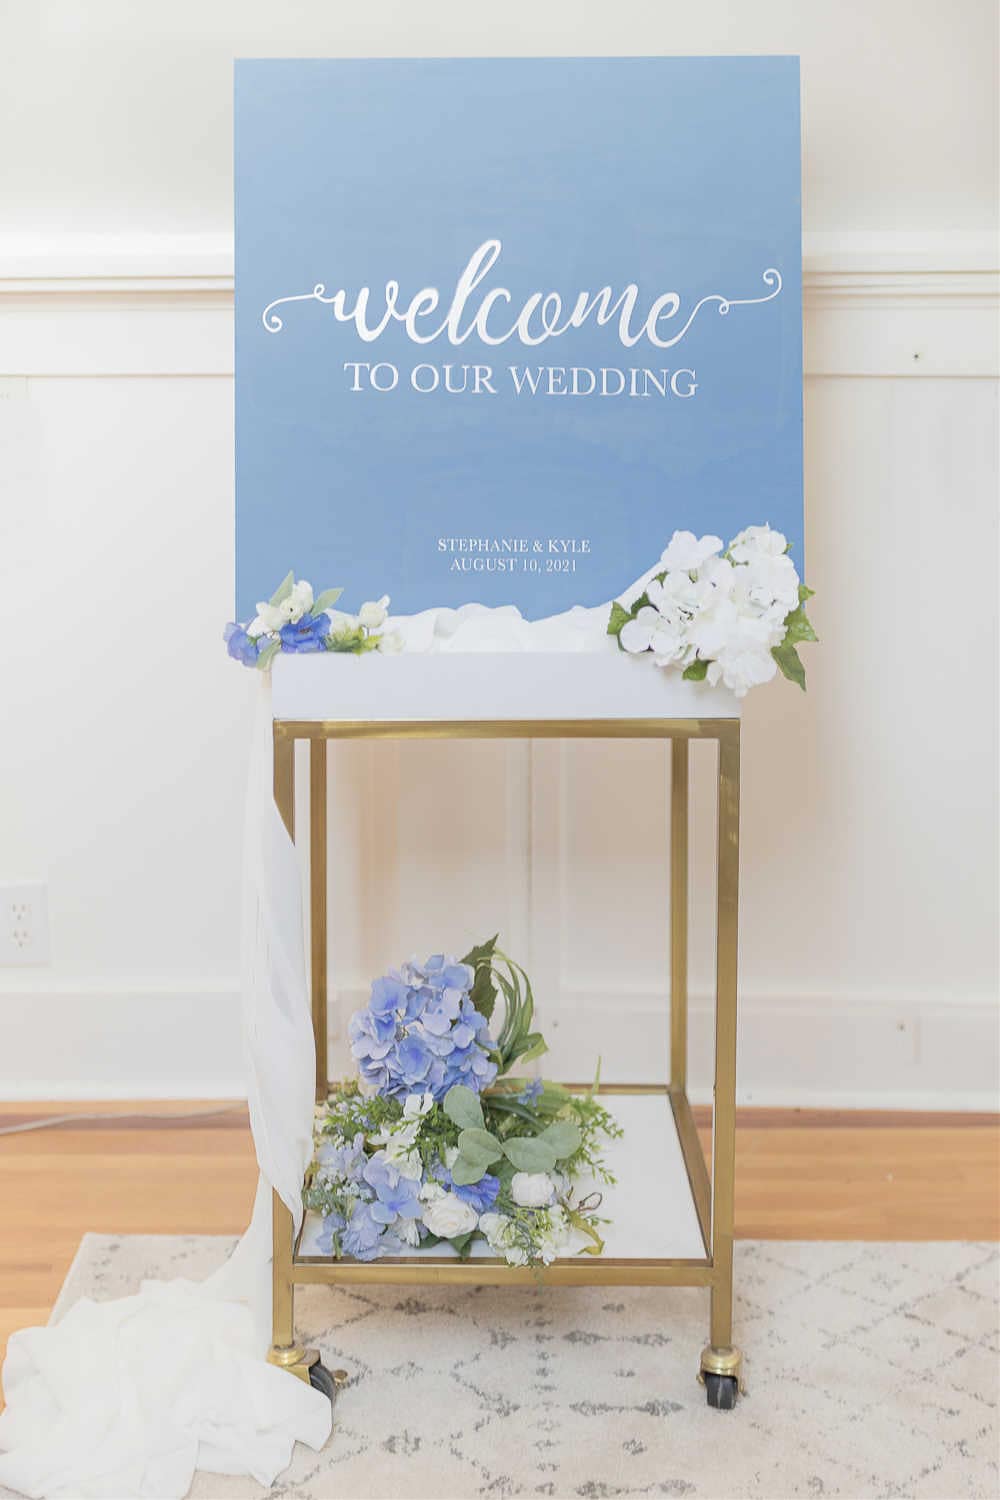 DIY blogger Stephanie Ziajka shares a tutorial for one of her favorite Cricut wedding projects, a wooden DIY wedding welcome sign, on Diary of a Debutante